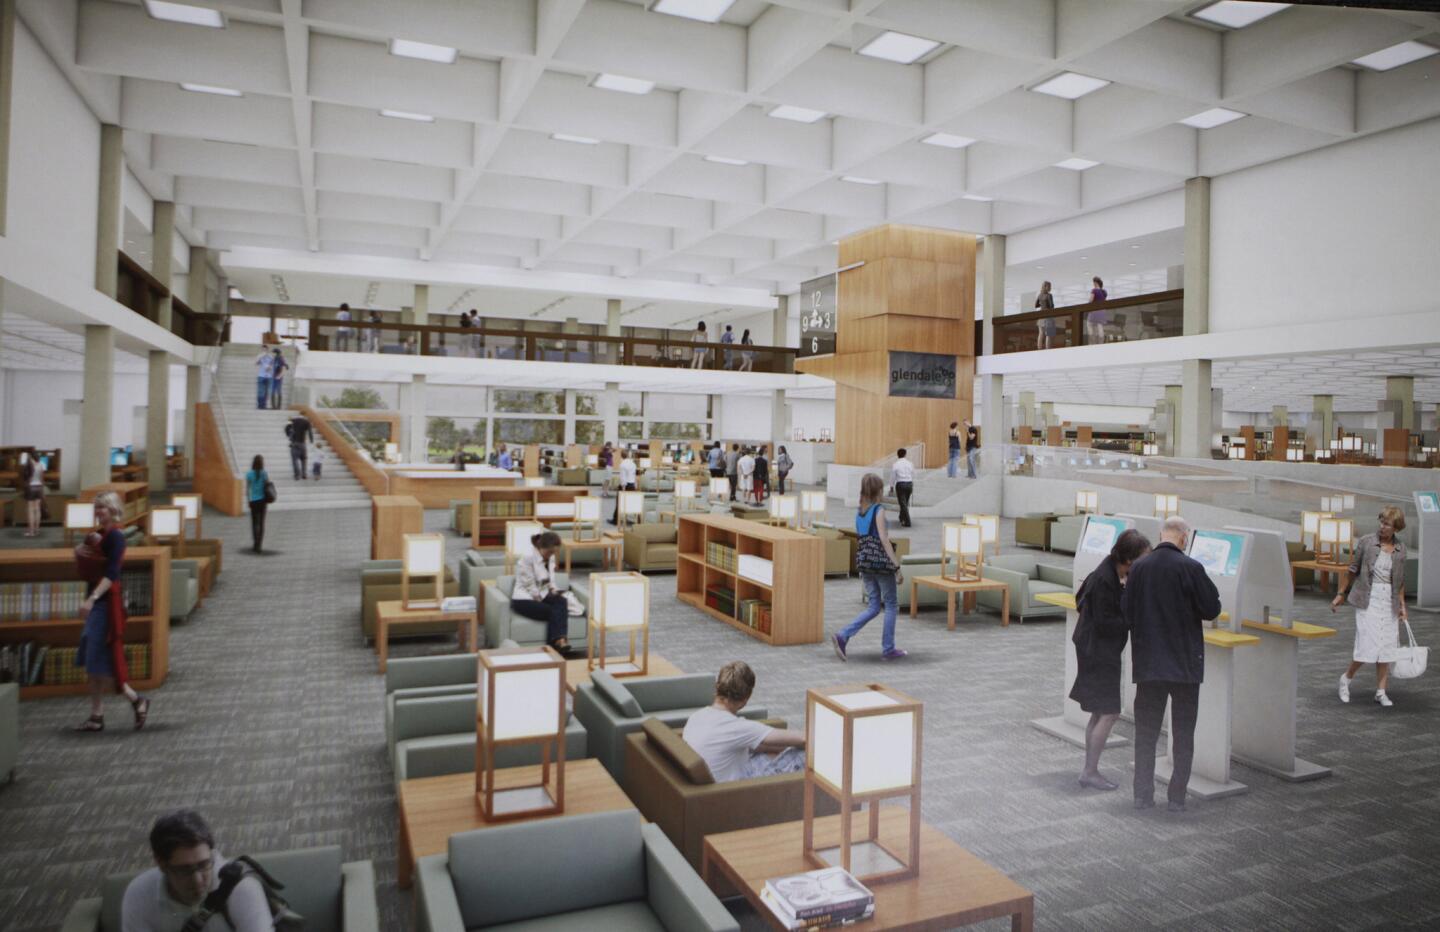 Photo Gallery: Glendale Central Library to undergo 18-month renovation